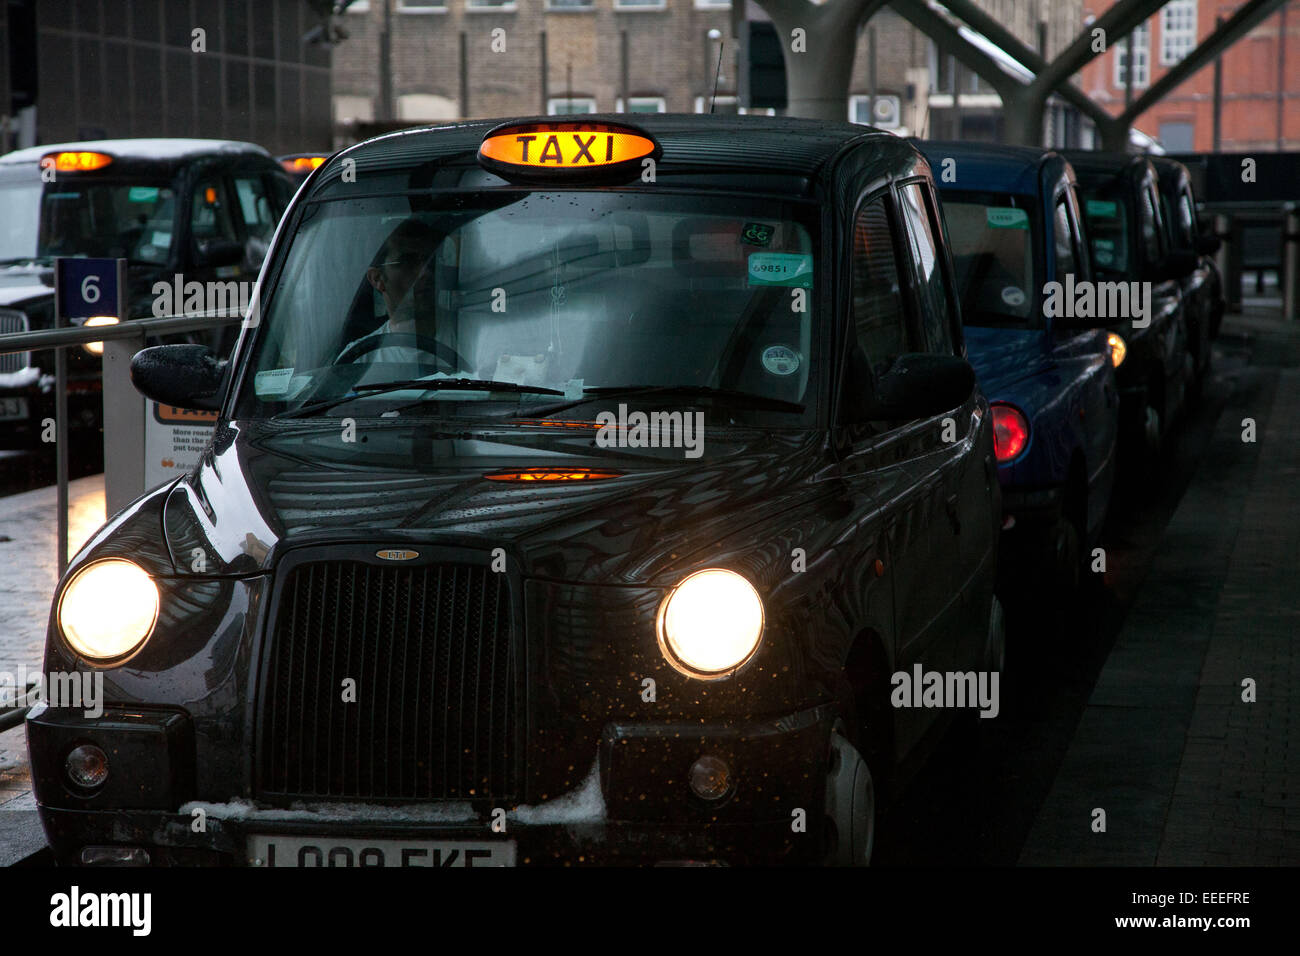 Taxi rank in the wintertime Stock Photo